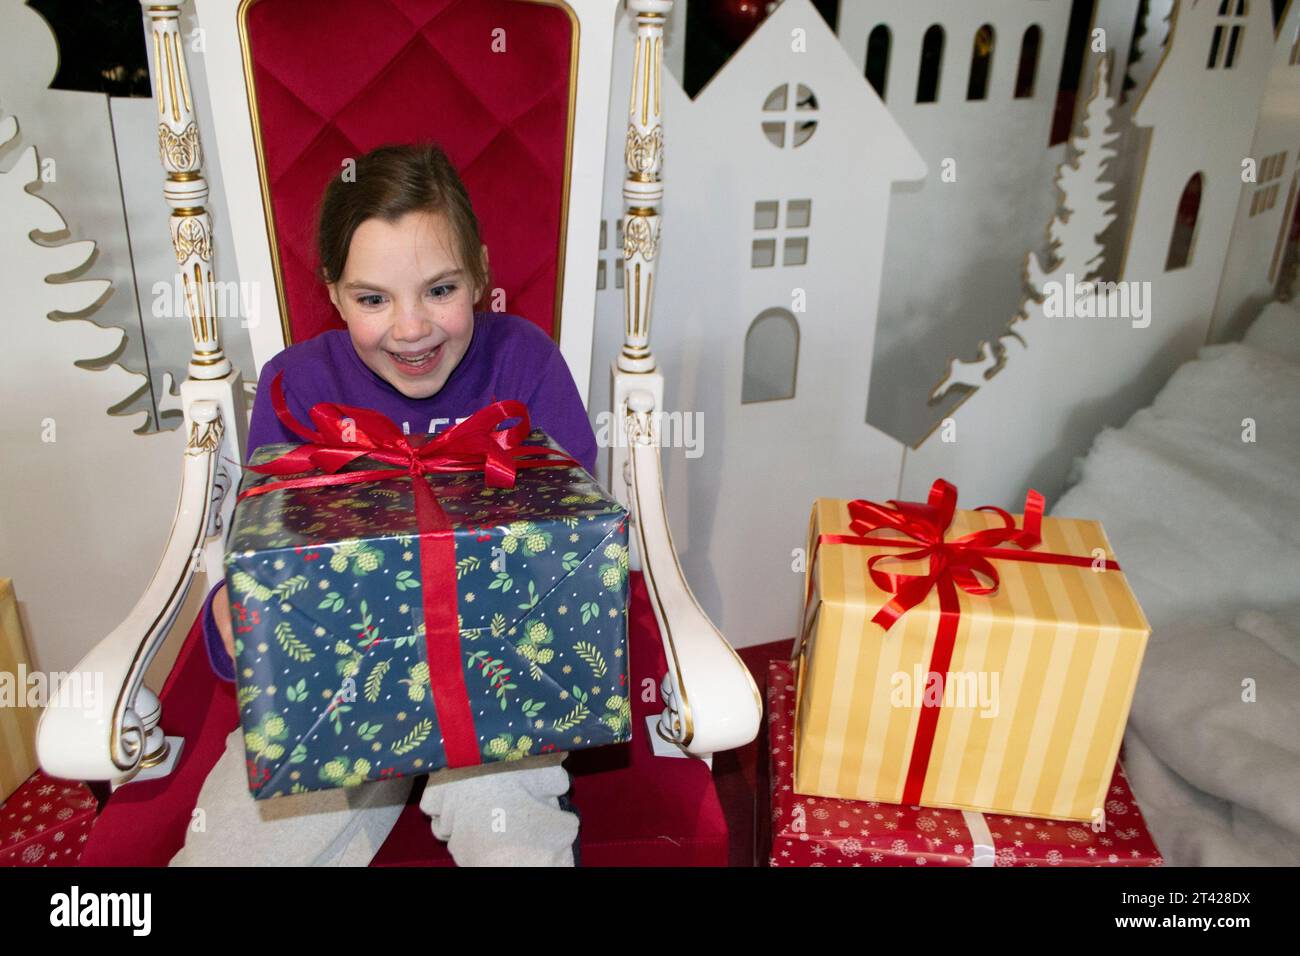 Happy little girl in Santa's hat sitting in a room decorated for Christmas. Portrait of adorable girl playing with Christmas gifts near New Year tree. Stock Photo